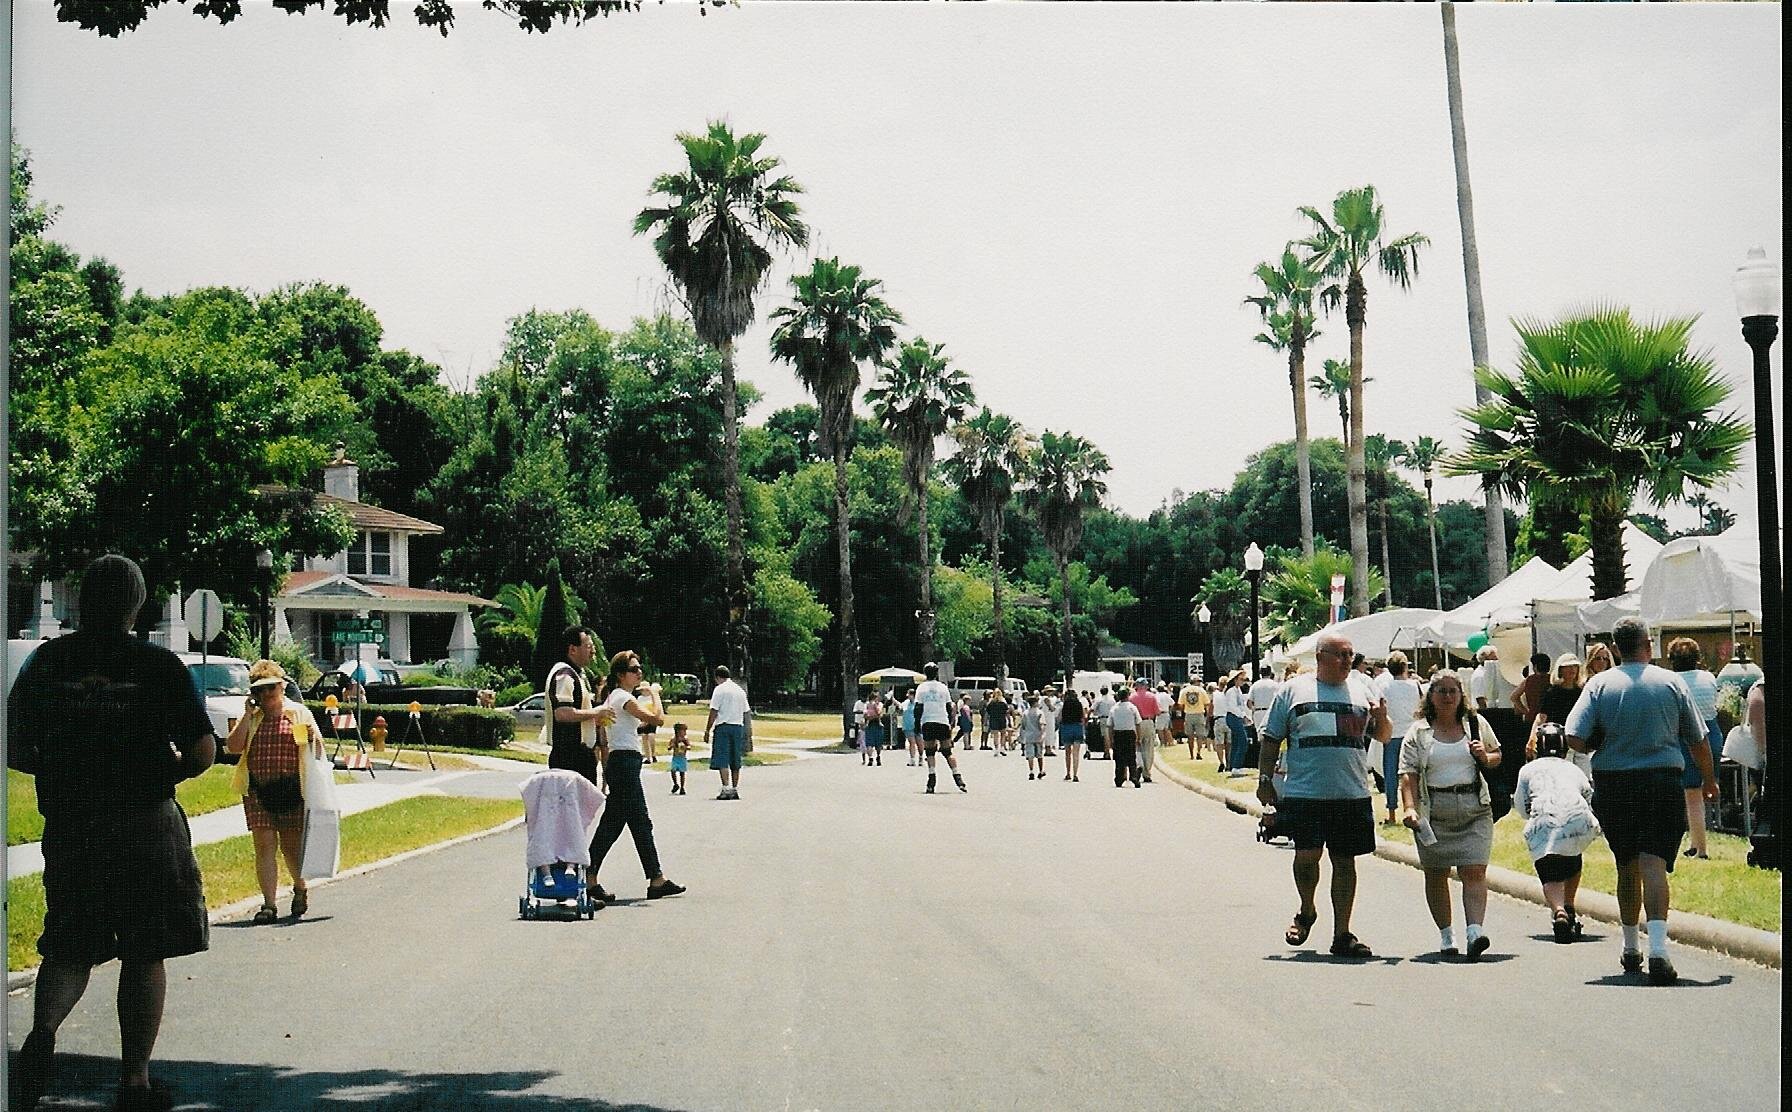  A look at what Mayfaire by-the-Lake was like 20 years ago! We are proud to have hosted one of the most celebrated arts festivals in the state of Florida for almost 50 years!  